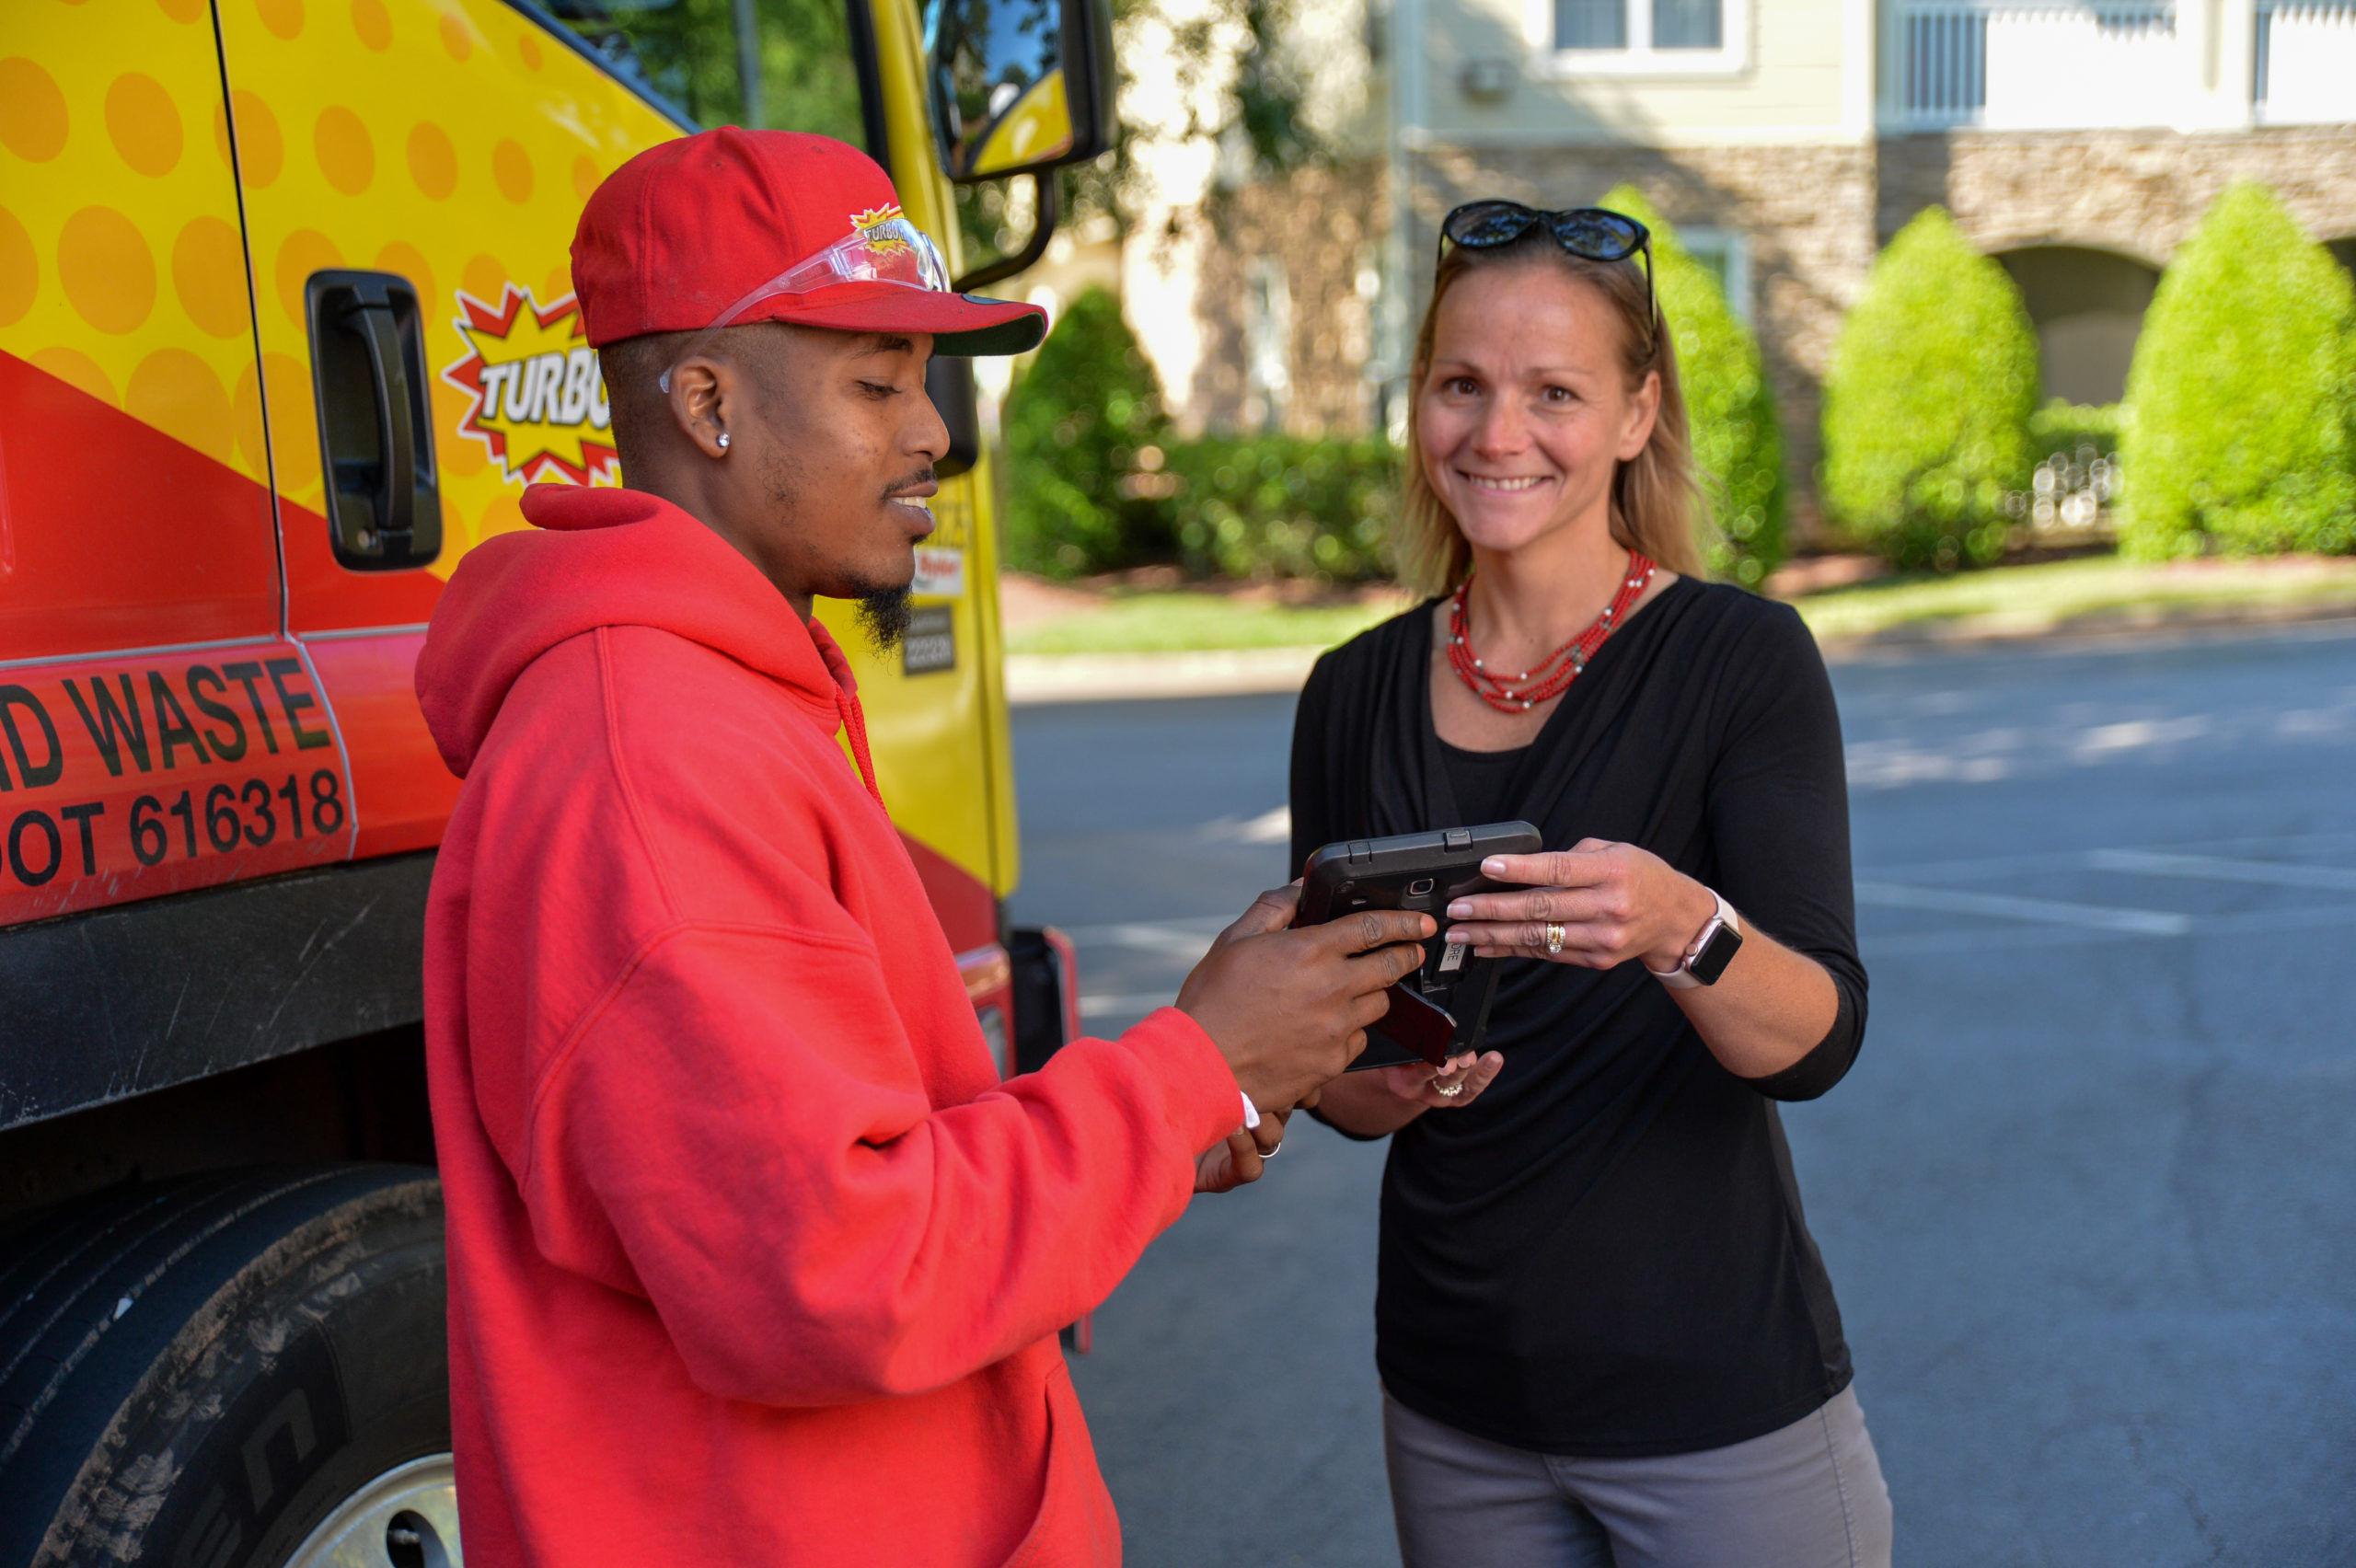 Two junk removal specialists hold an iPad and smile in Camp Springs, Maryland